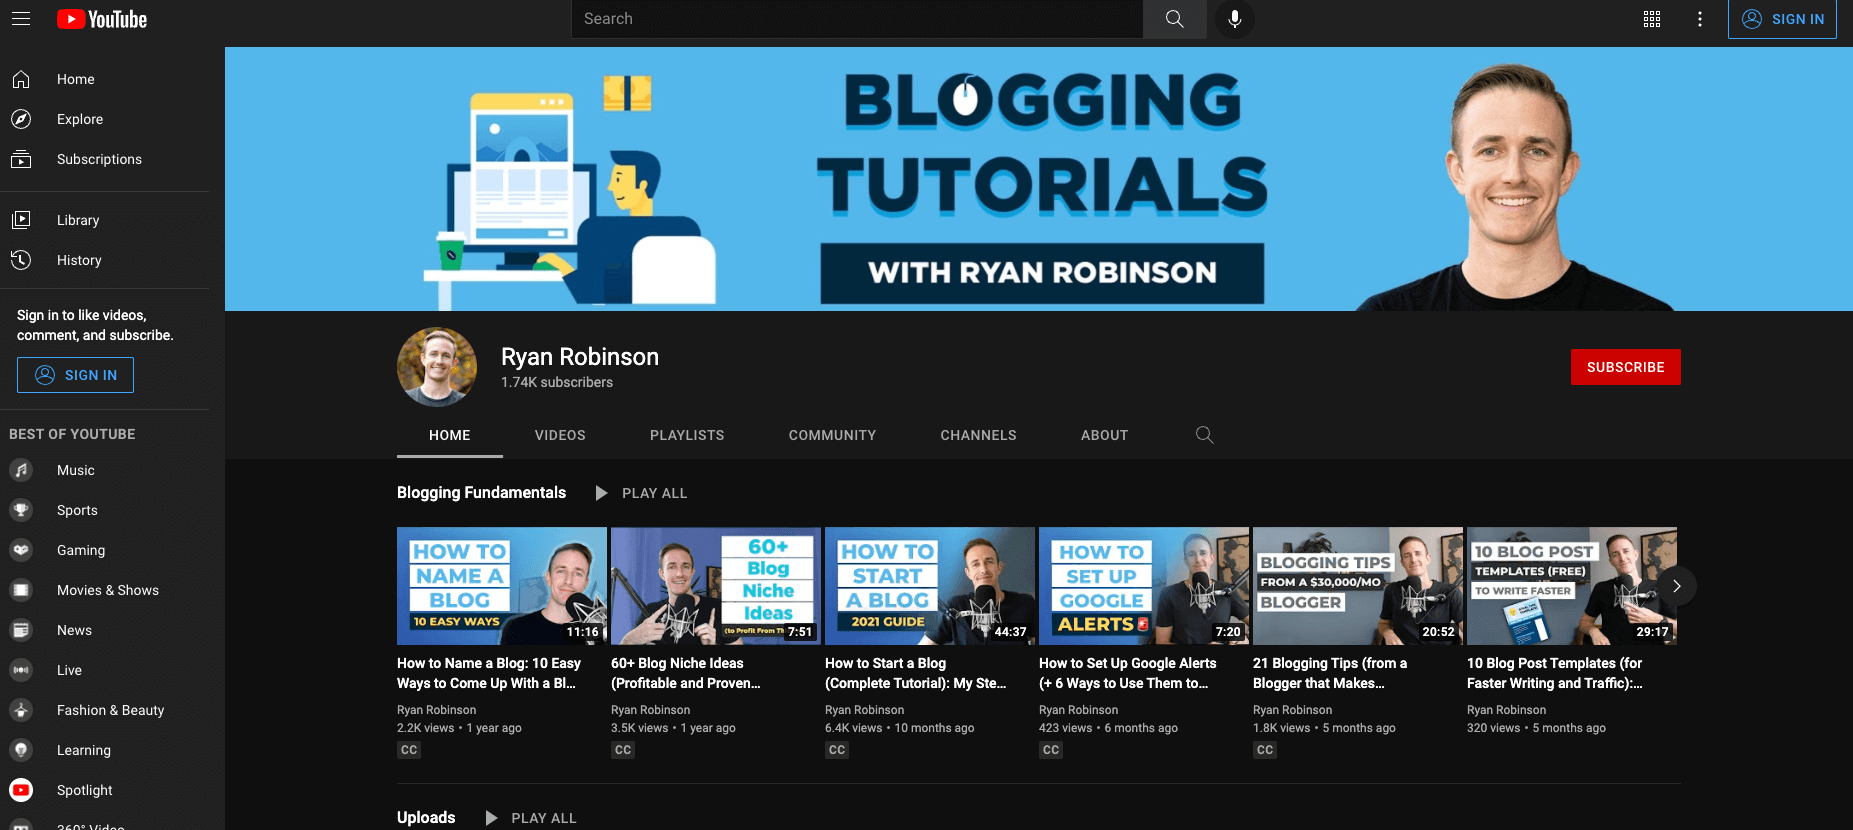 Ryan Robinson's YouTube Channel (to Diversify Traffic)